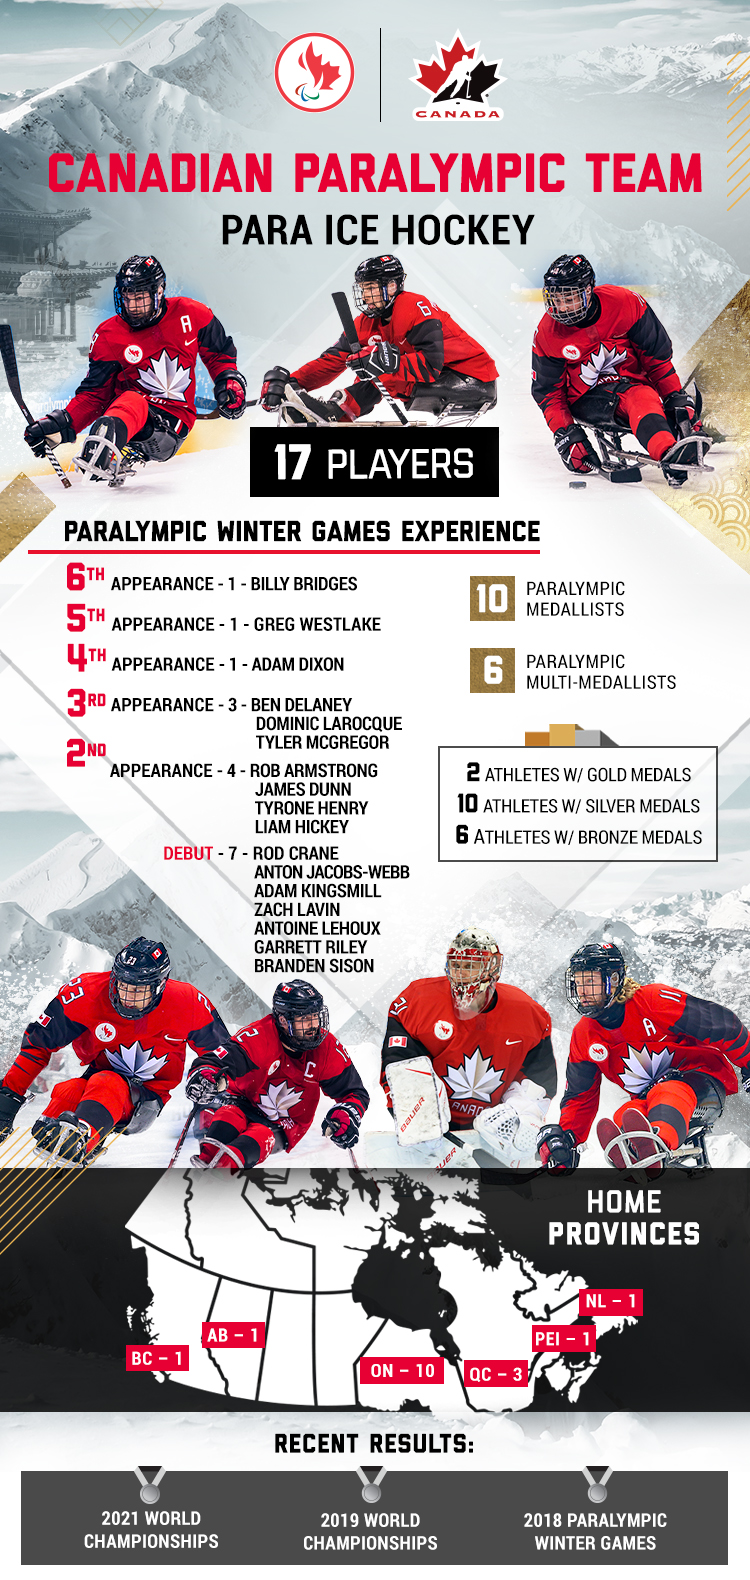 An infographic showing stats about Canada's Para ice hockey team for the Beijing 2022 Paralympic Winter Games